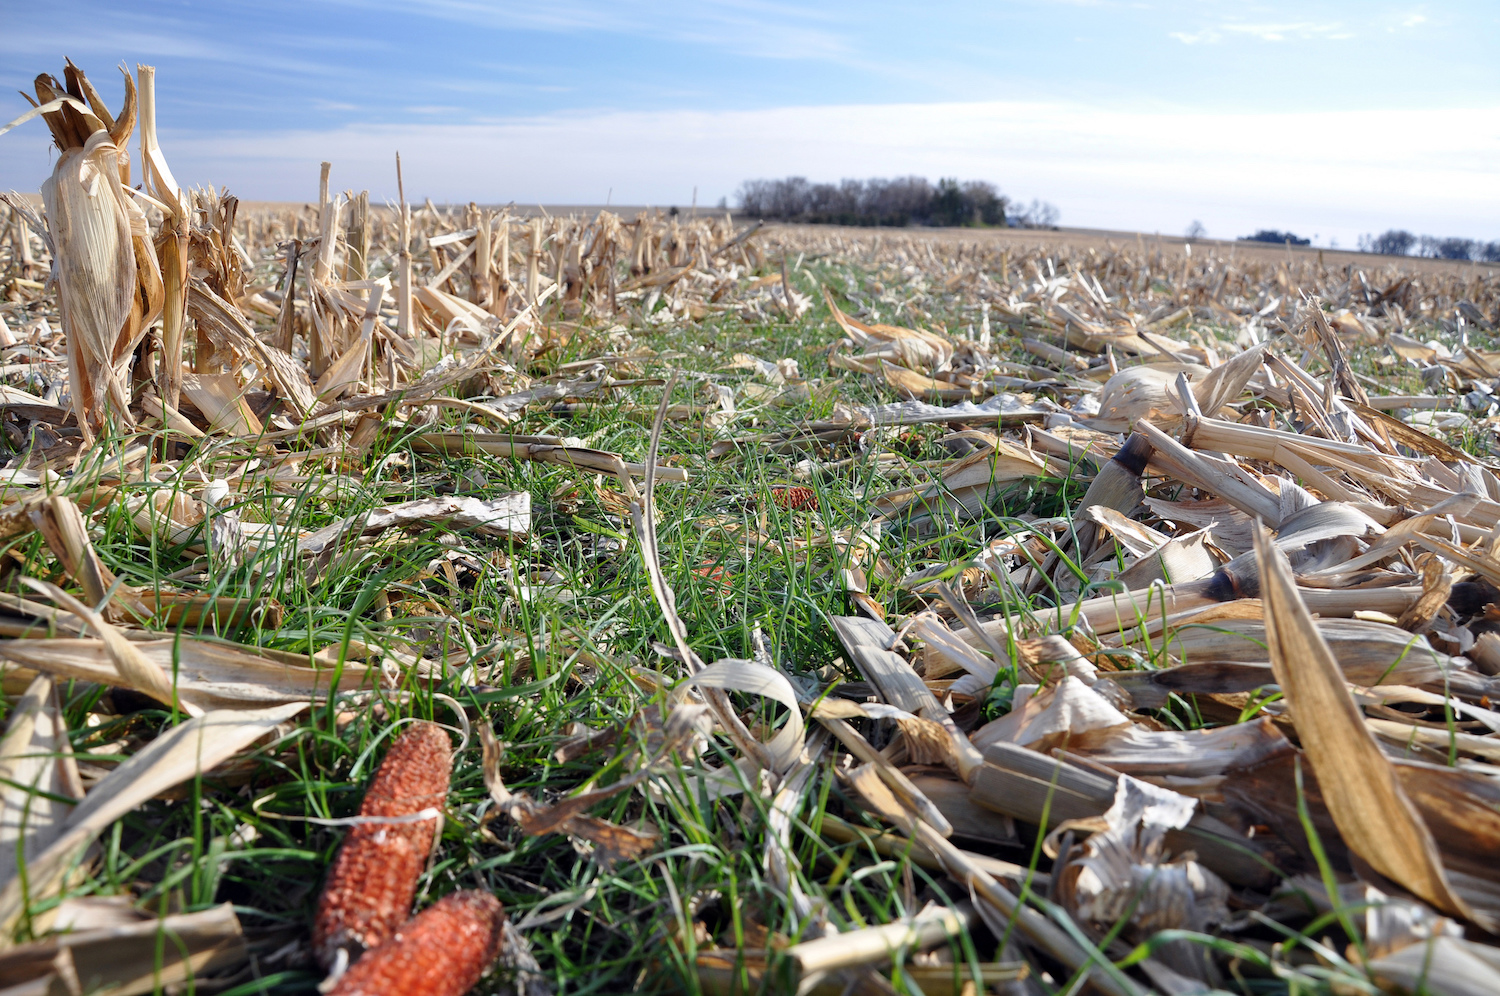 How the federal government is discouraging regenerative agriculture. Credit: Natural Resources Conservation Service / Flickr, March 2019